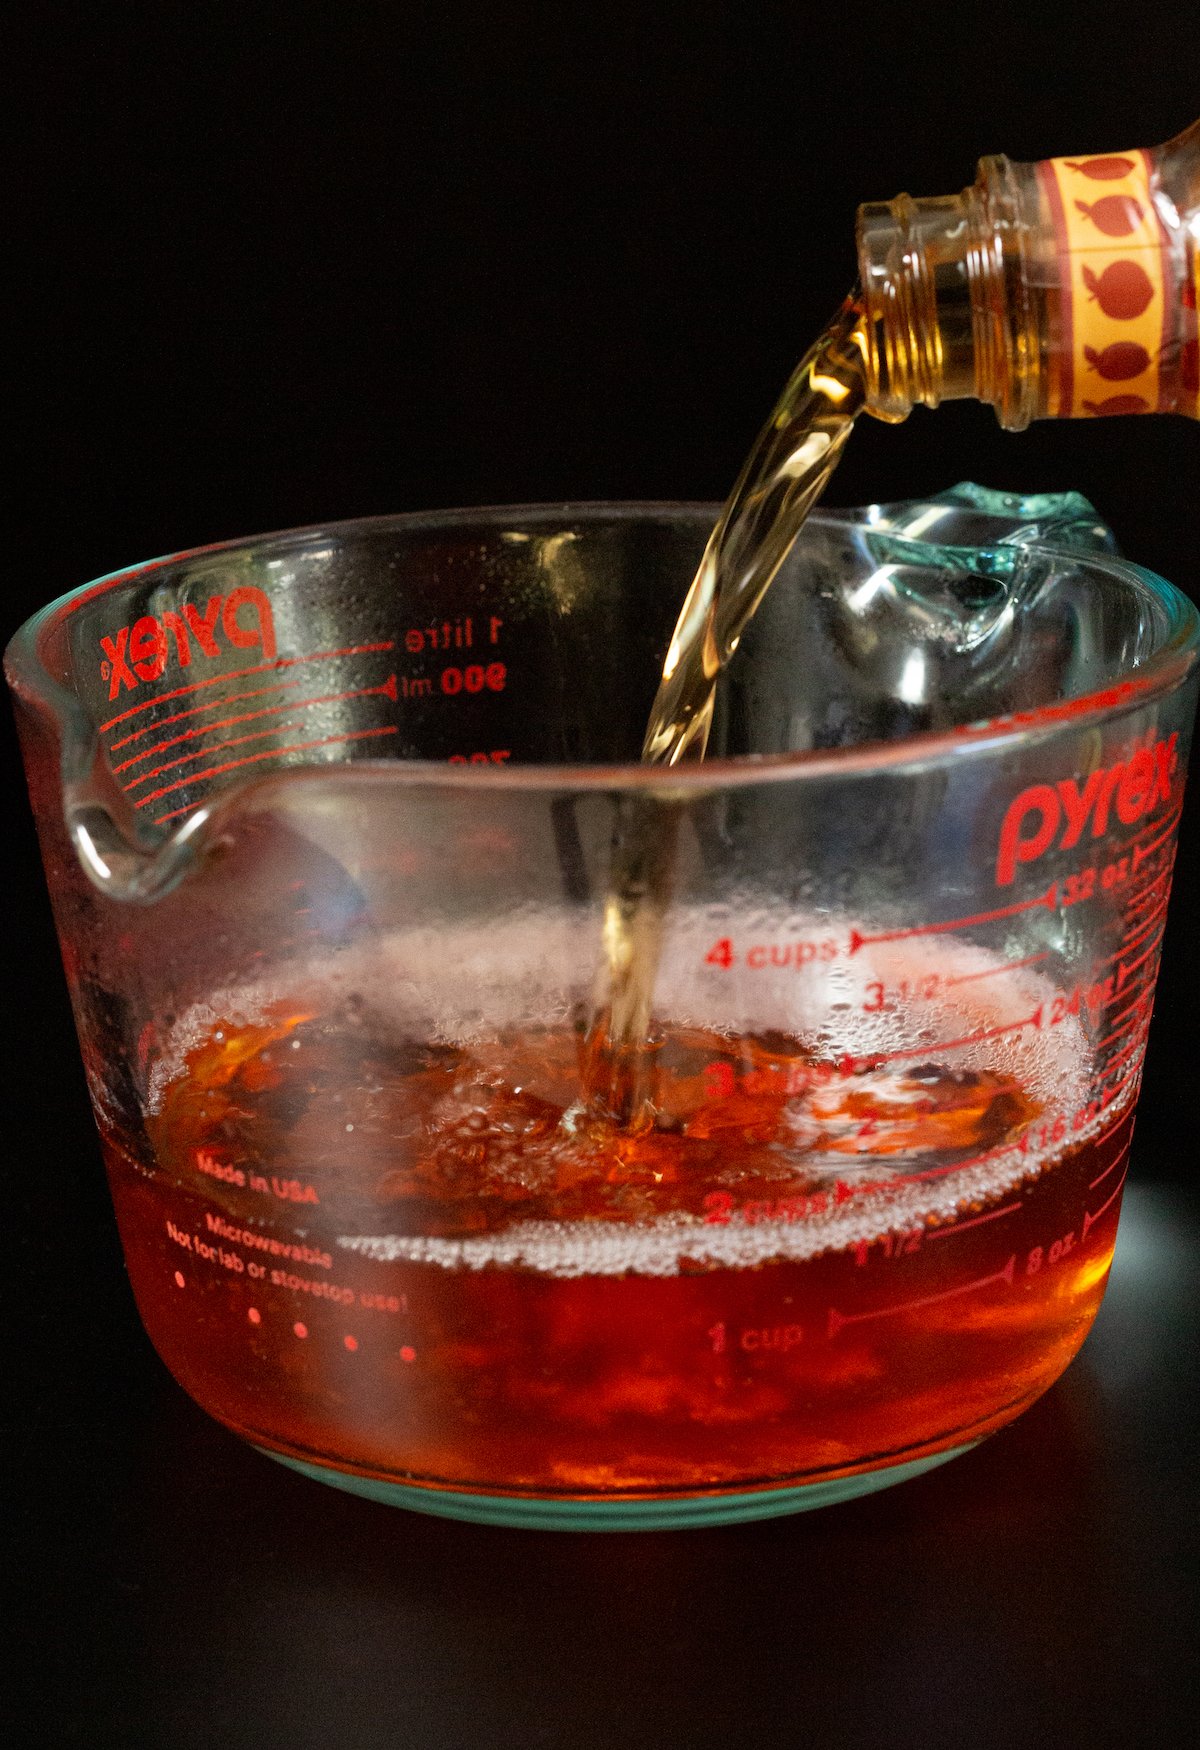 A large pyrex cup with liquid peach gelatin being filled with Crown Peach whisky.